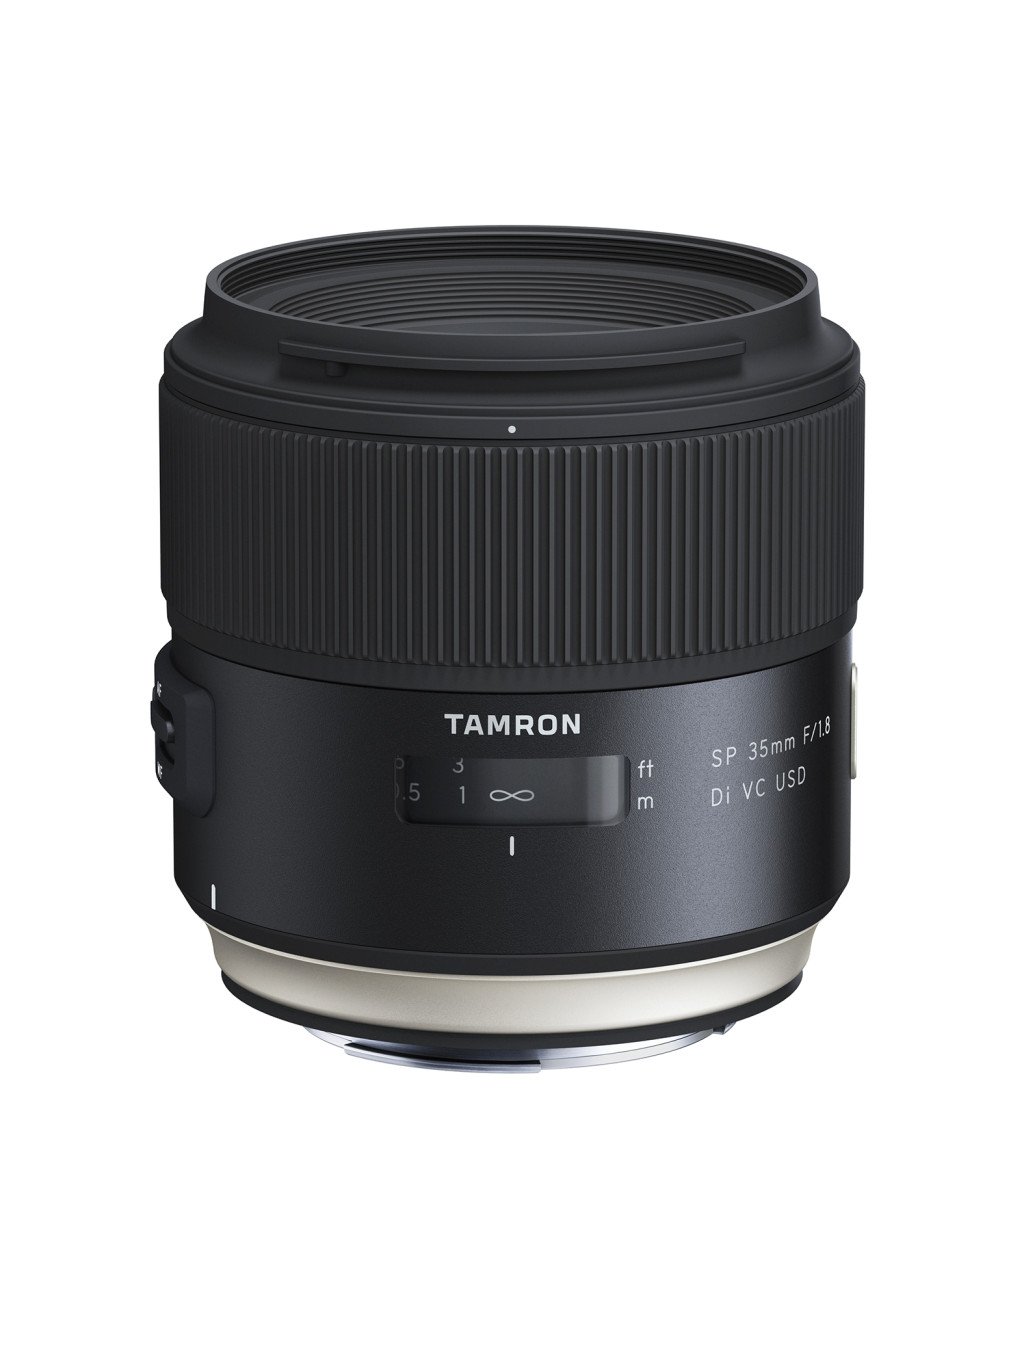 Tamron Wants Desperately To Be Sigma, and That's Not a Bad Thing